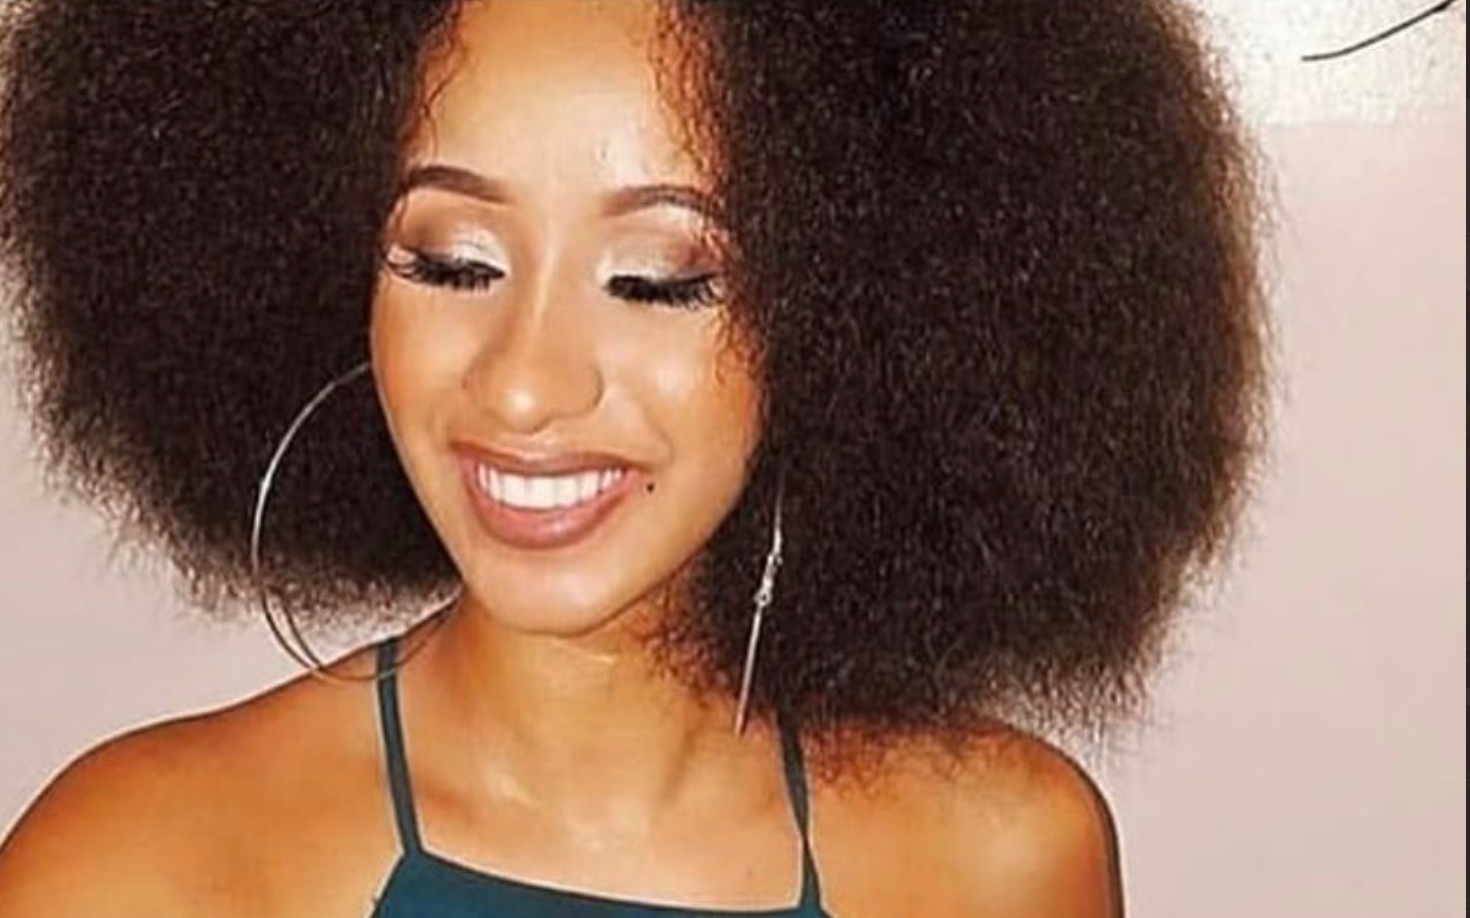 Cardi B Shares Rare Look at Her Natural Hair in Instagram Story